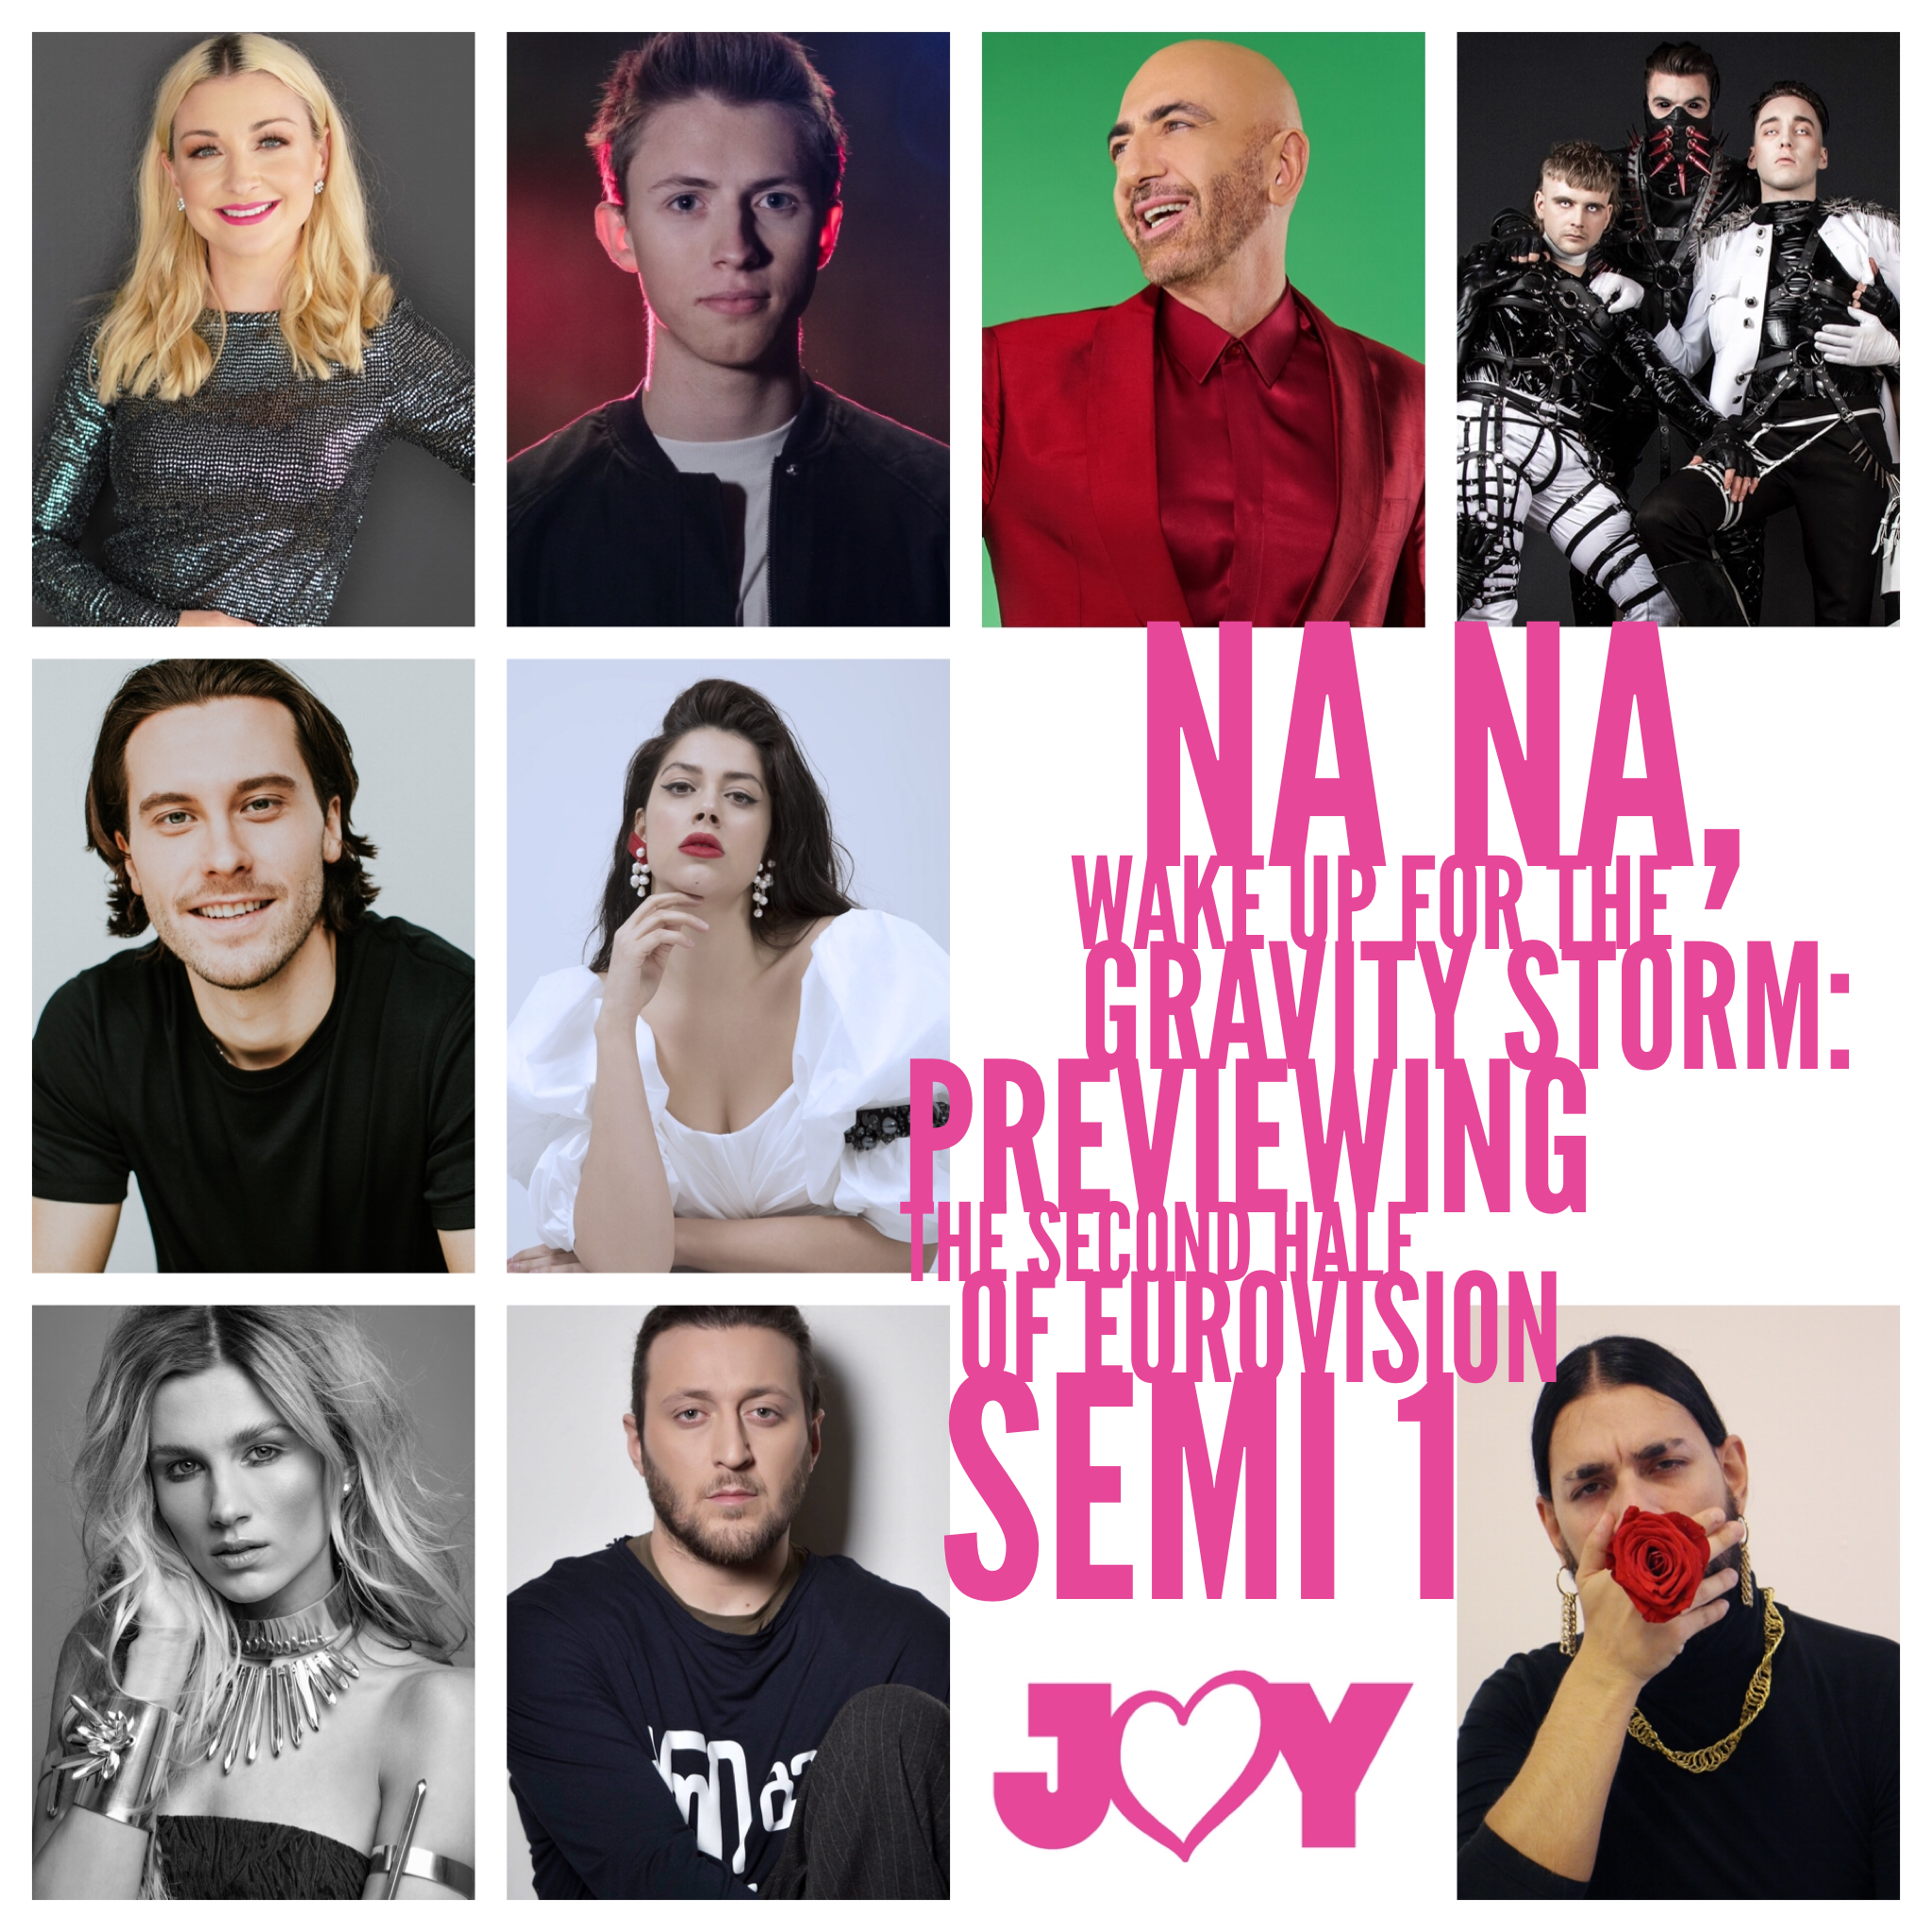 Eurovision 2019: Previewing the second half of Semi Final 1